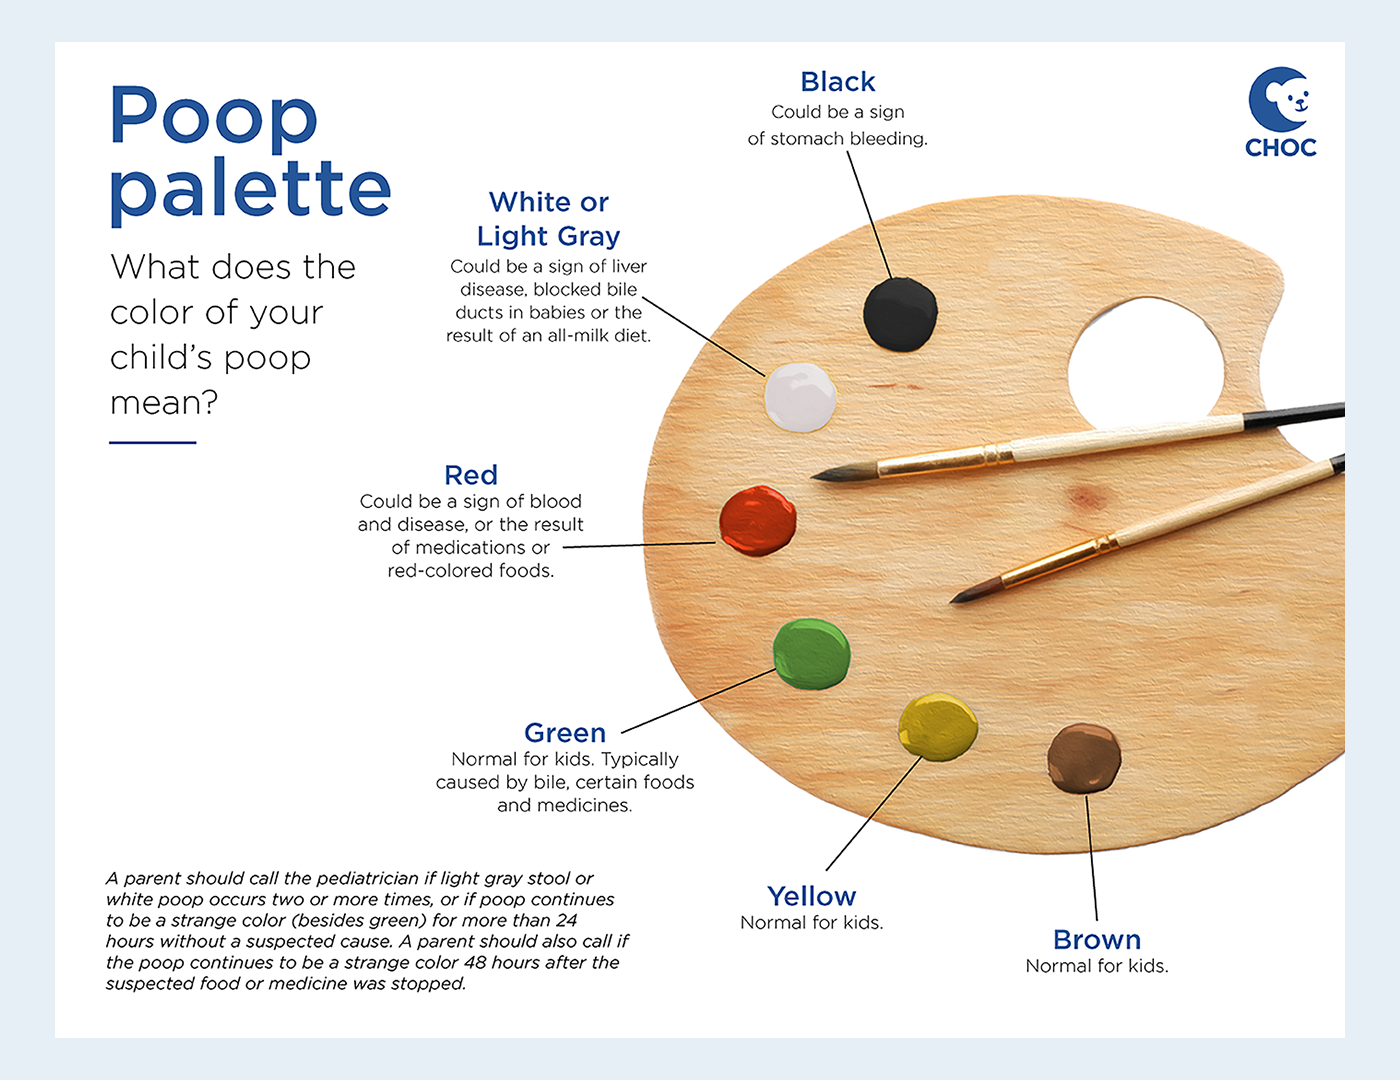 Poop palette graphic - what does the color of your child's poop mean?